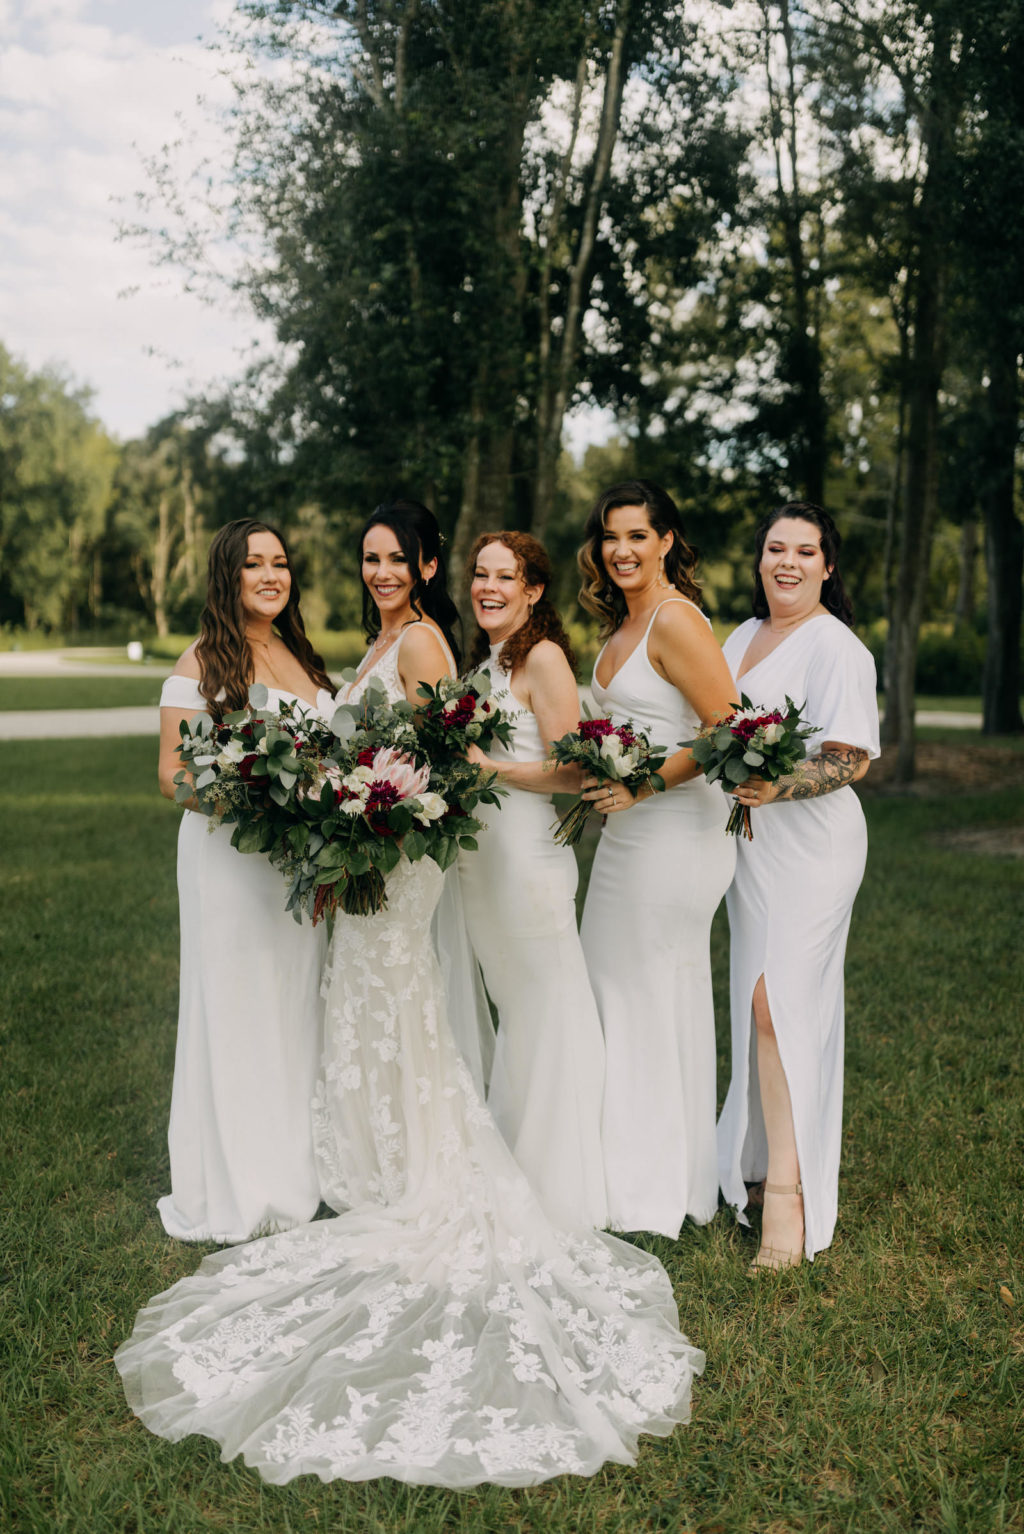 Bride and Bridesmaids Wearing Mix and Match White Dresses Holding Dark and Moody Garden Inspired Greenery with Pink King Proteas Floral Bouquets | Tampa Bay Wedding Photographer Amber McWhorter Photography | Outdoor Wedding Venue Paradise Spring | Wedding Florist Brides & Blooms